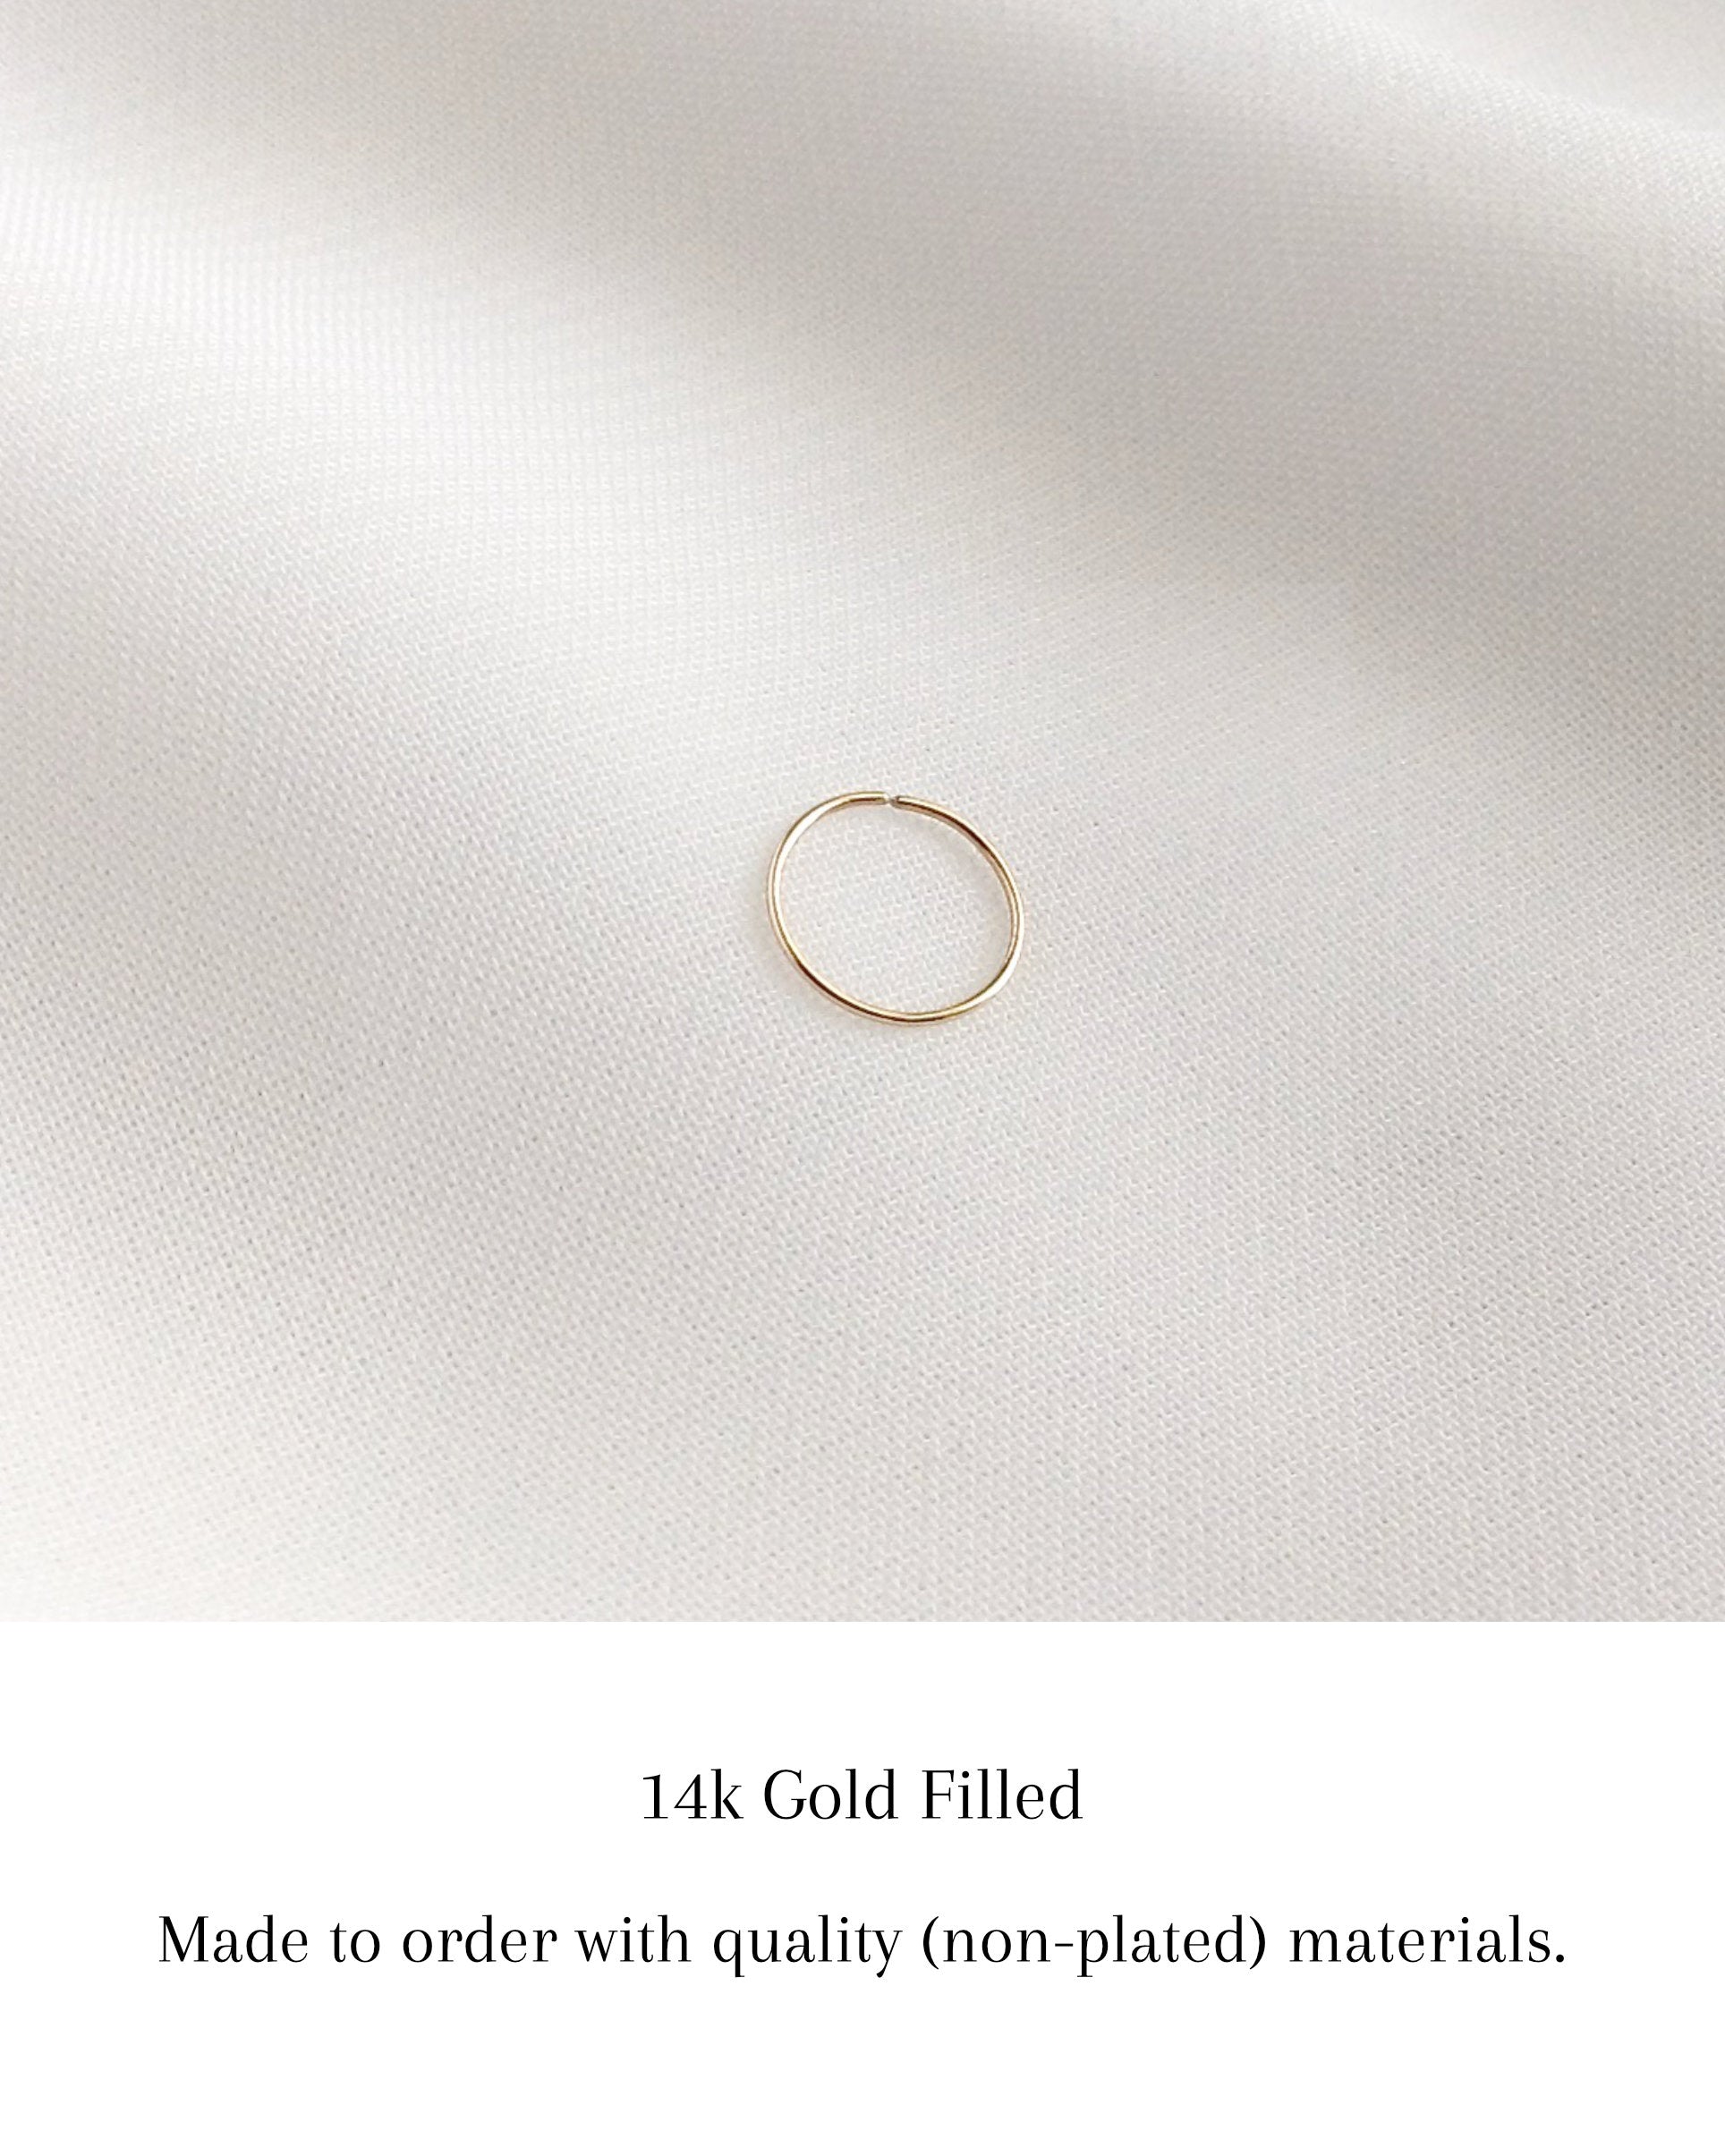 Gold Filled Nose Hoop Quality Materials | IB Jewelry